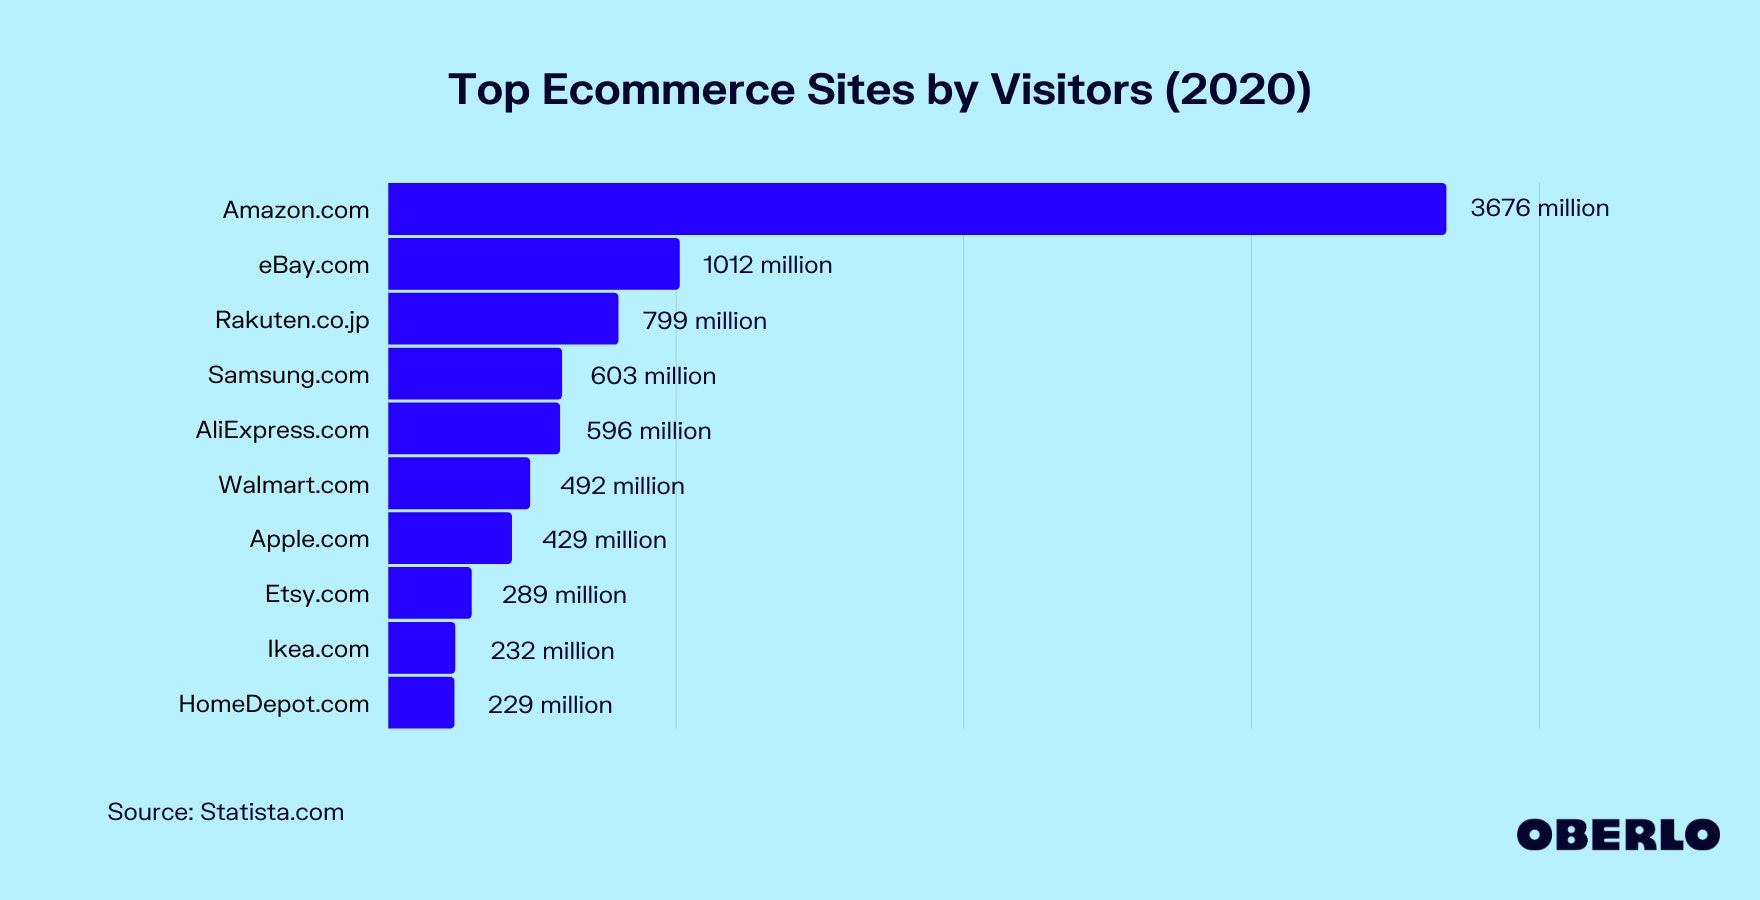 Top Ecommerce Sites by Visitors Graphic